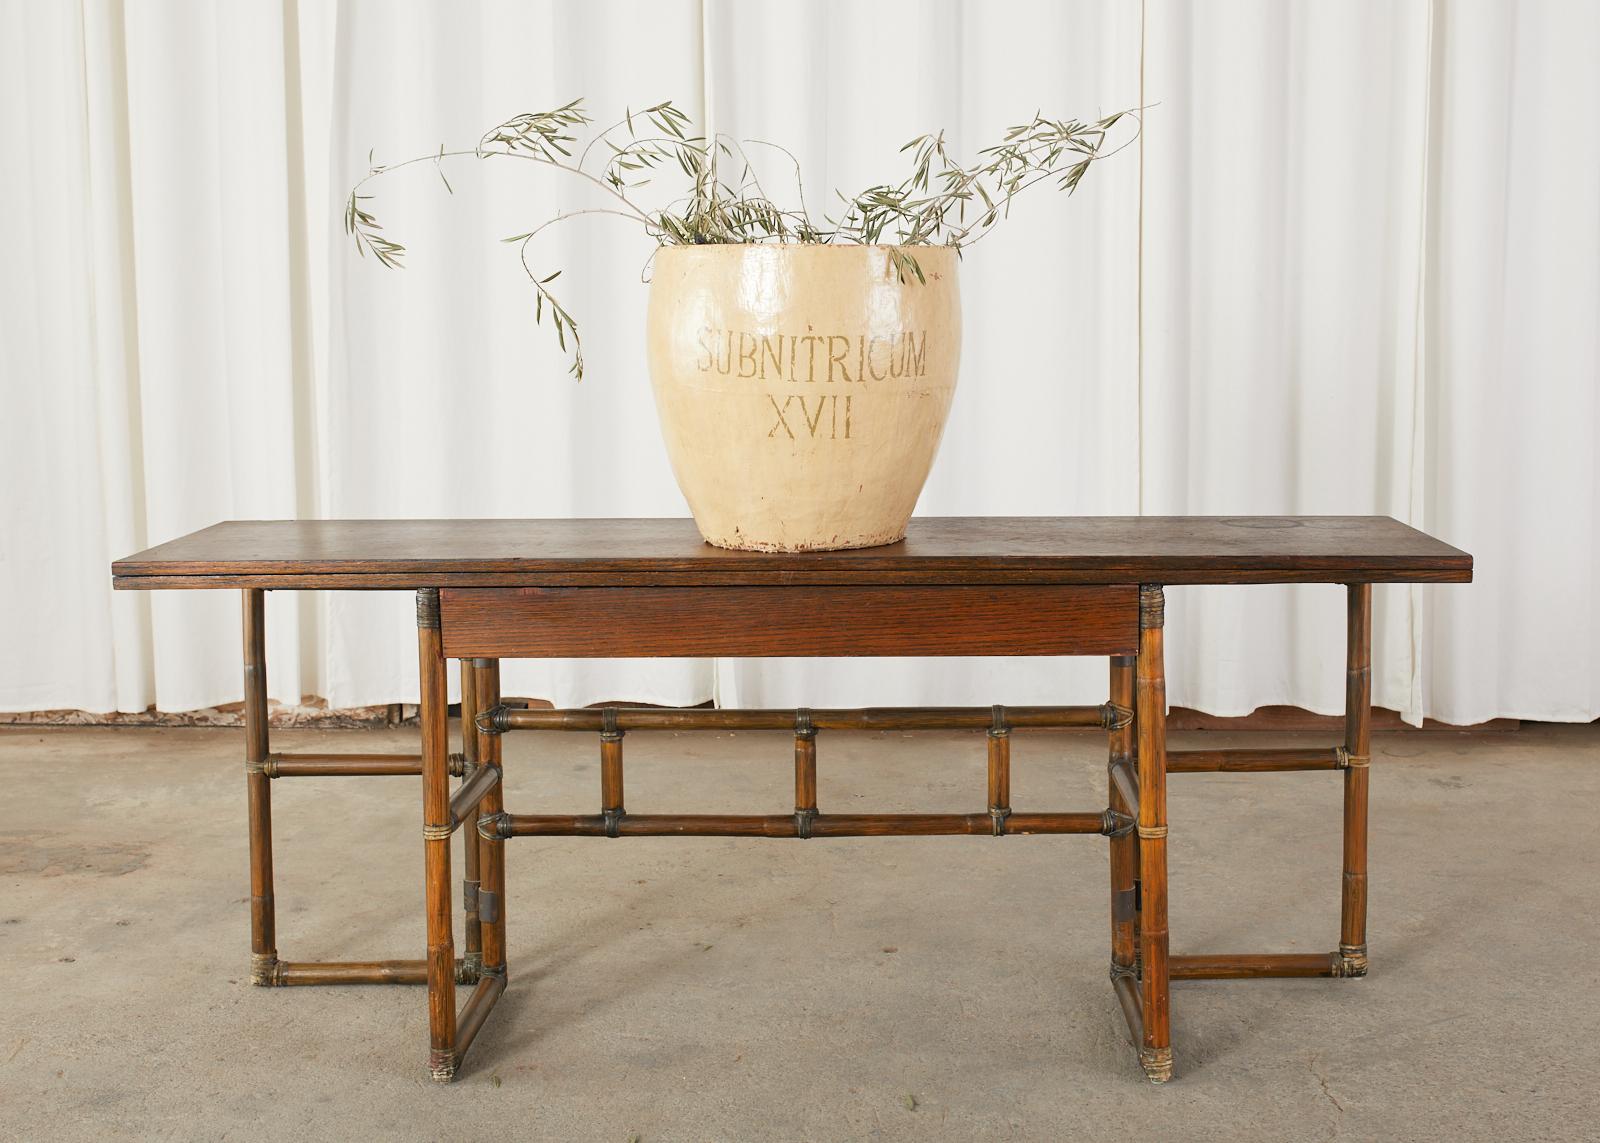 Versatile bamboo rattan console table, server, or writing table desk made by McGuire in the California organic modern style. The table features an expandable flip-top crafted from oak. The top expands from 18 inches deep to 36 inches deep to make a